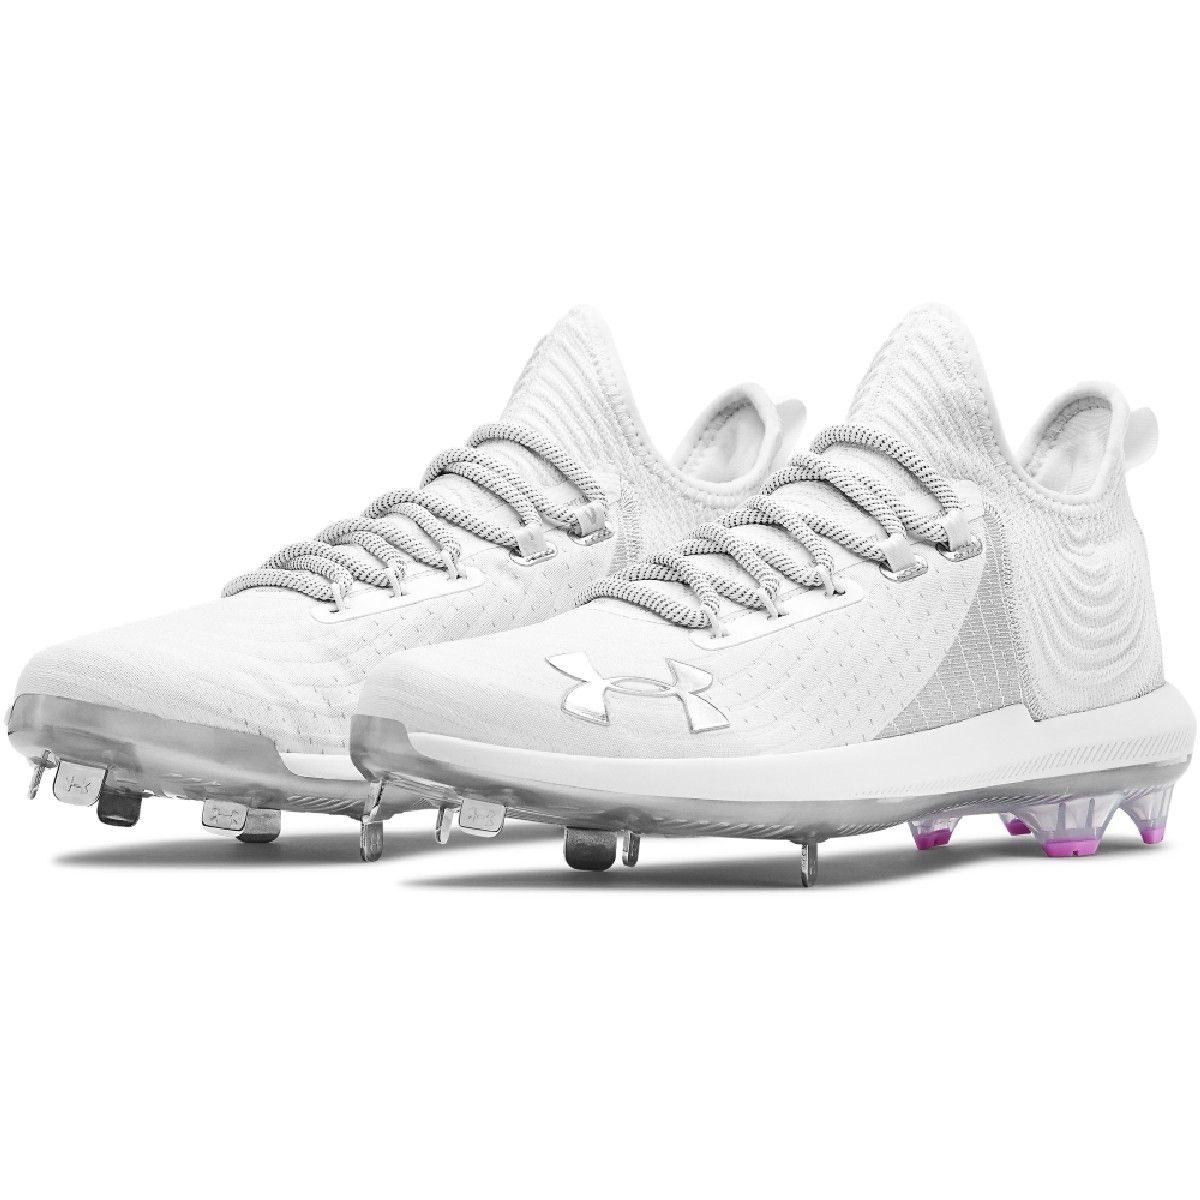 under armour bryce harper cleats